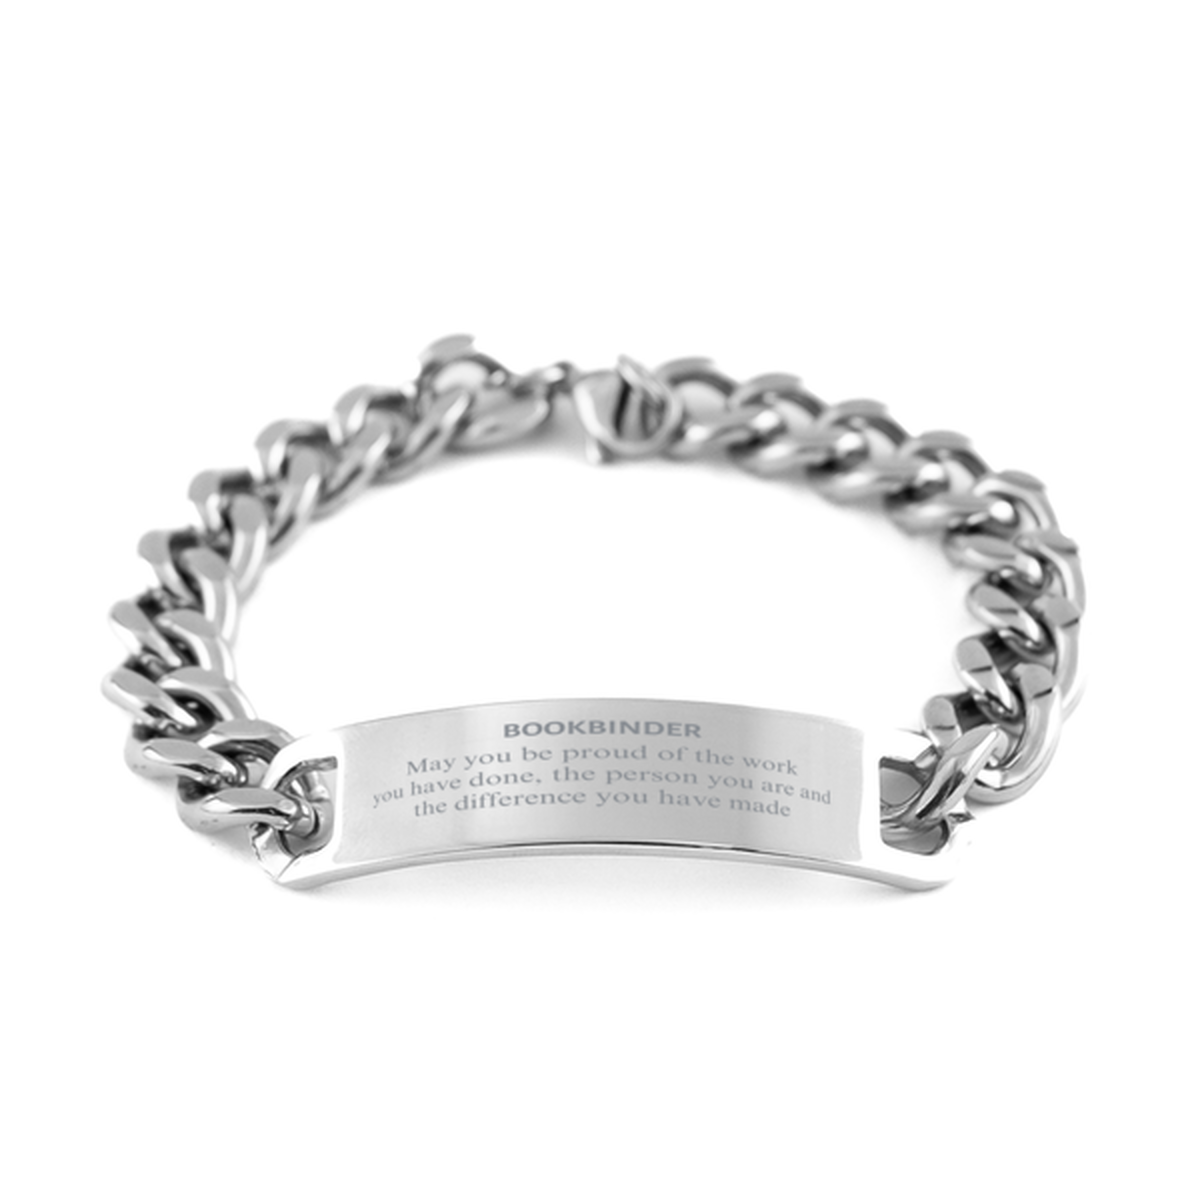 Bookbinder May you be proud of the work you have done, Retirement Bookbinder Cuban Chain Stainless Steel Bracelet for Colleague Appreciation Gifts Amazing for Bookbinder